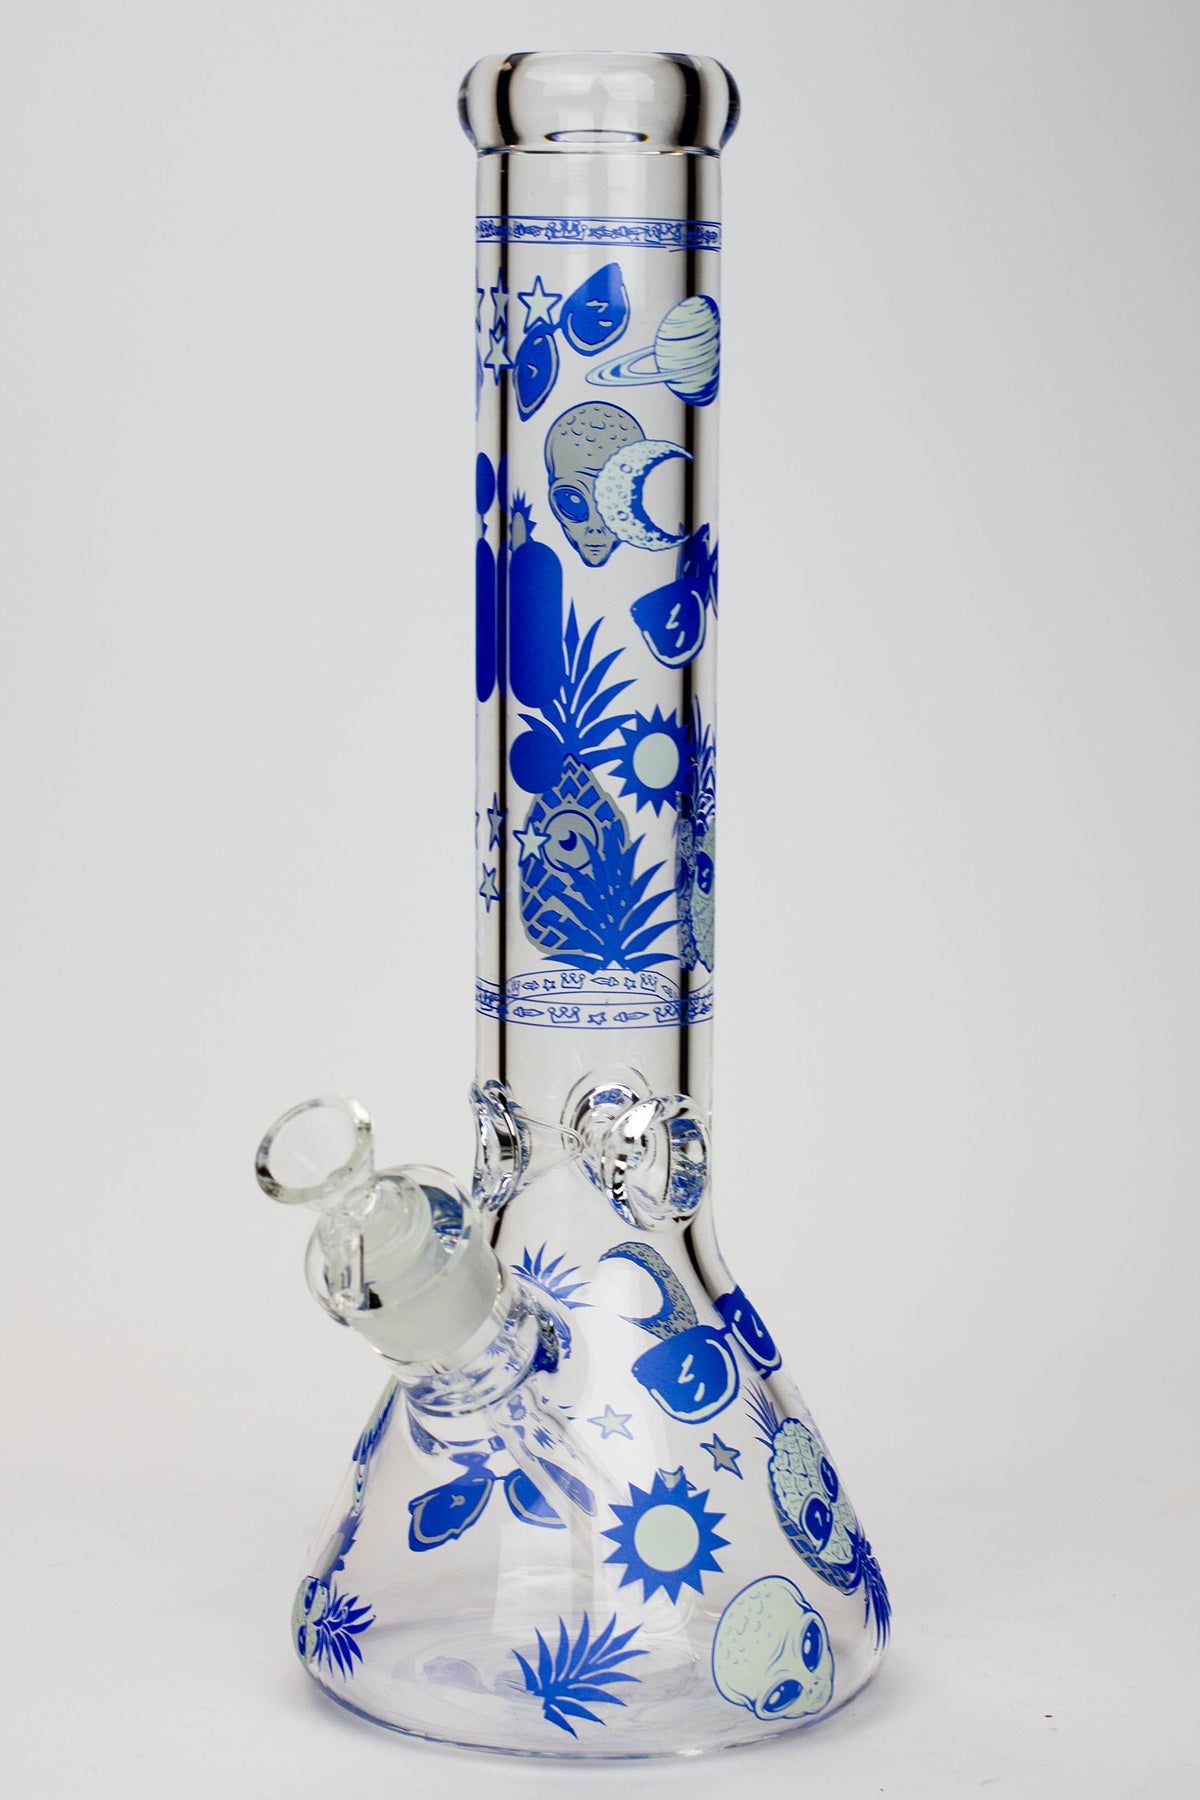 14" Infyniti Pineapple Glow in the dark 7 mm glass bong Flower Power Packages Blue 